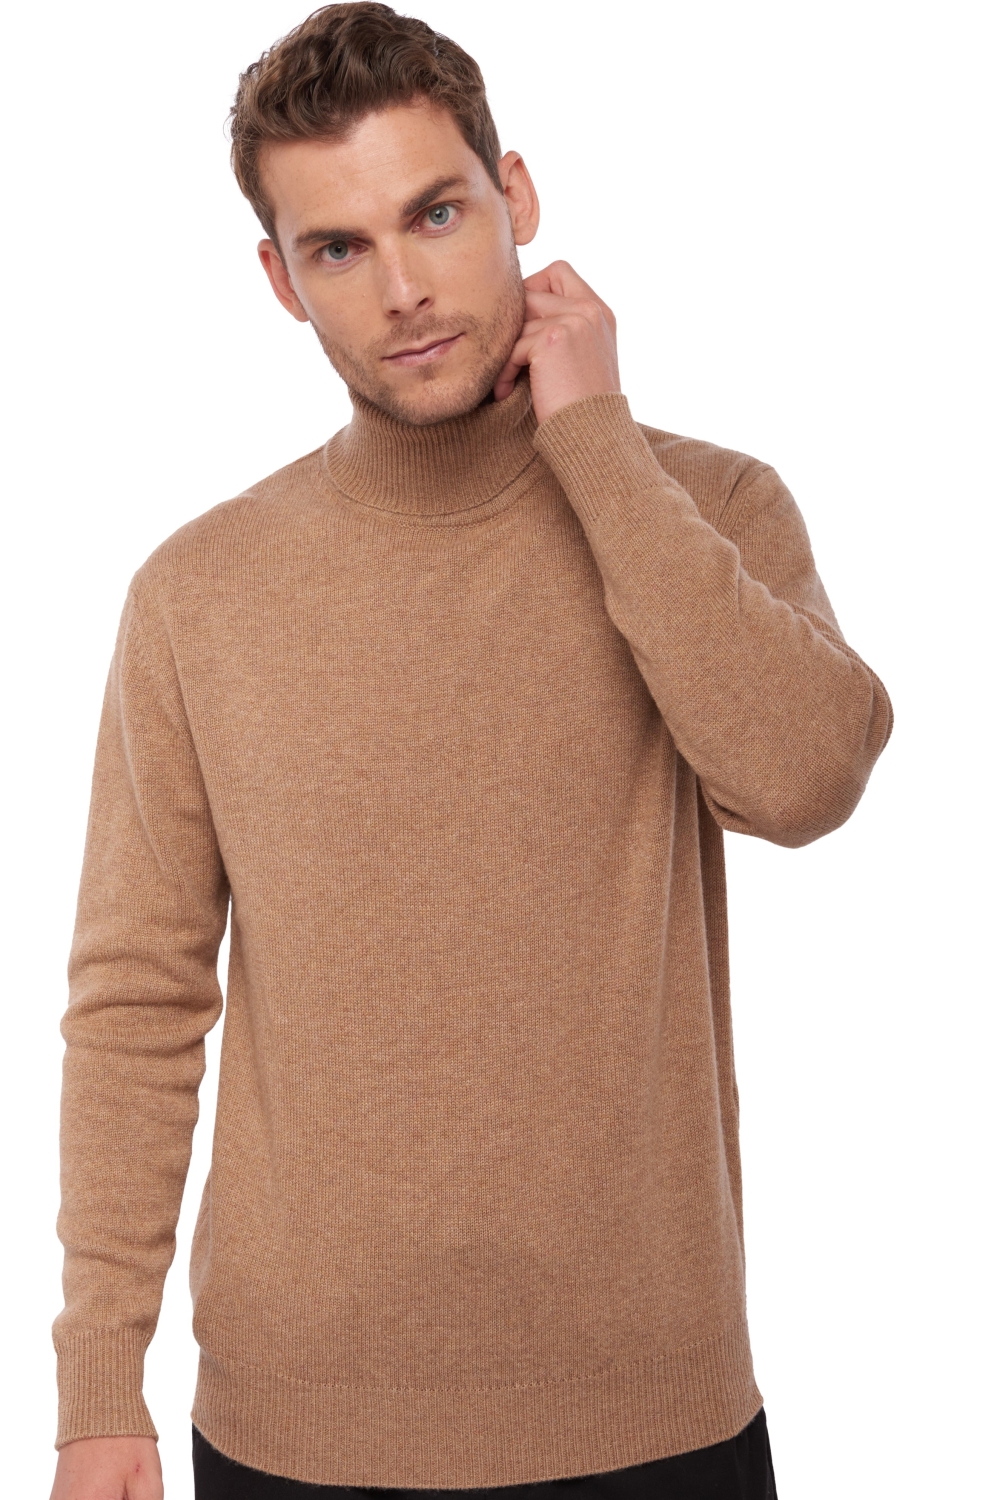 Cachemire pull homme edgar 4f camel chine xs